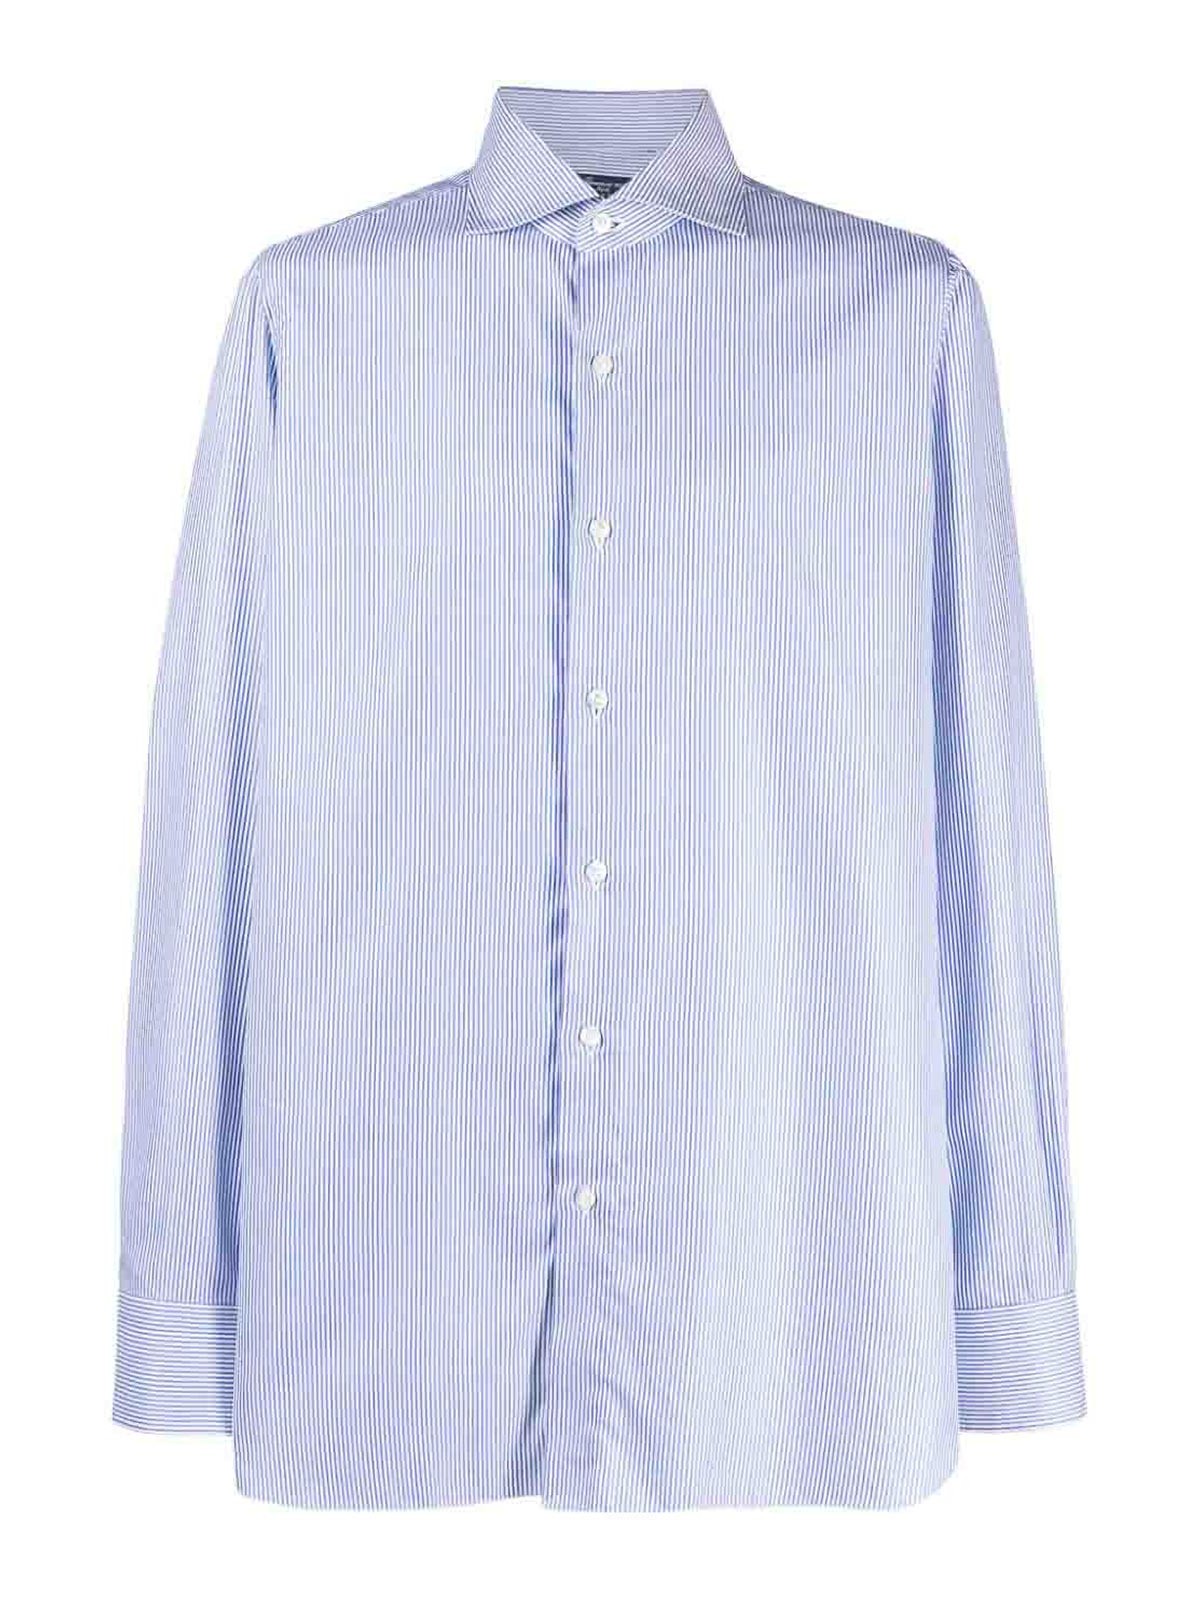 Finamore 1925 Regular Fit Striped Cotton Shirt In Blue